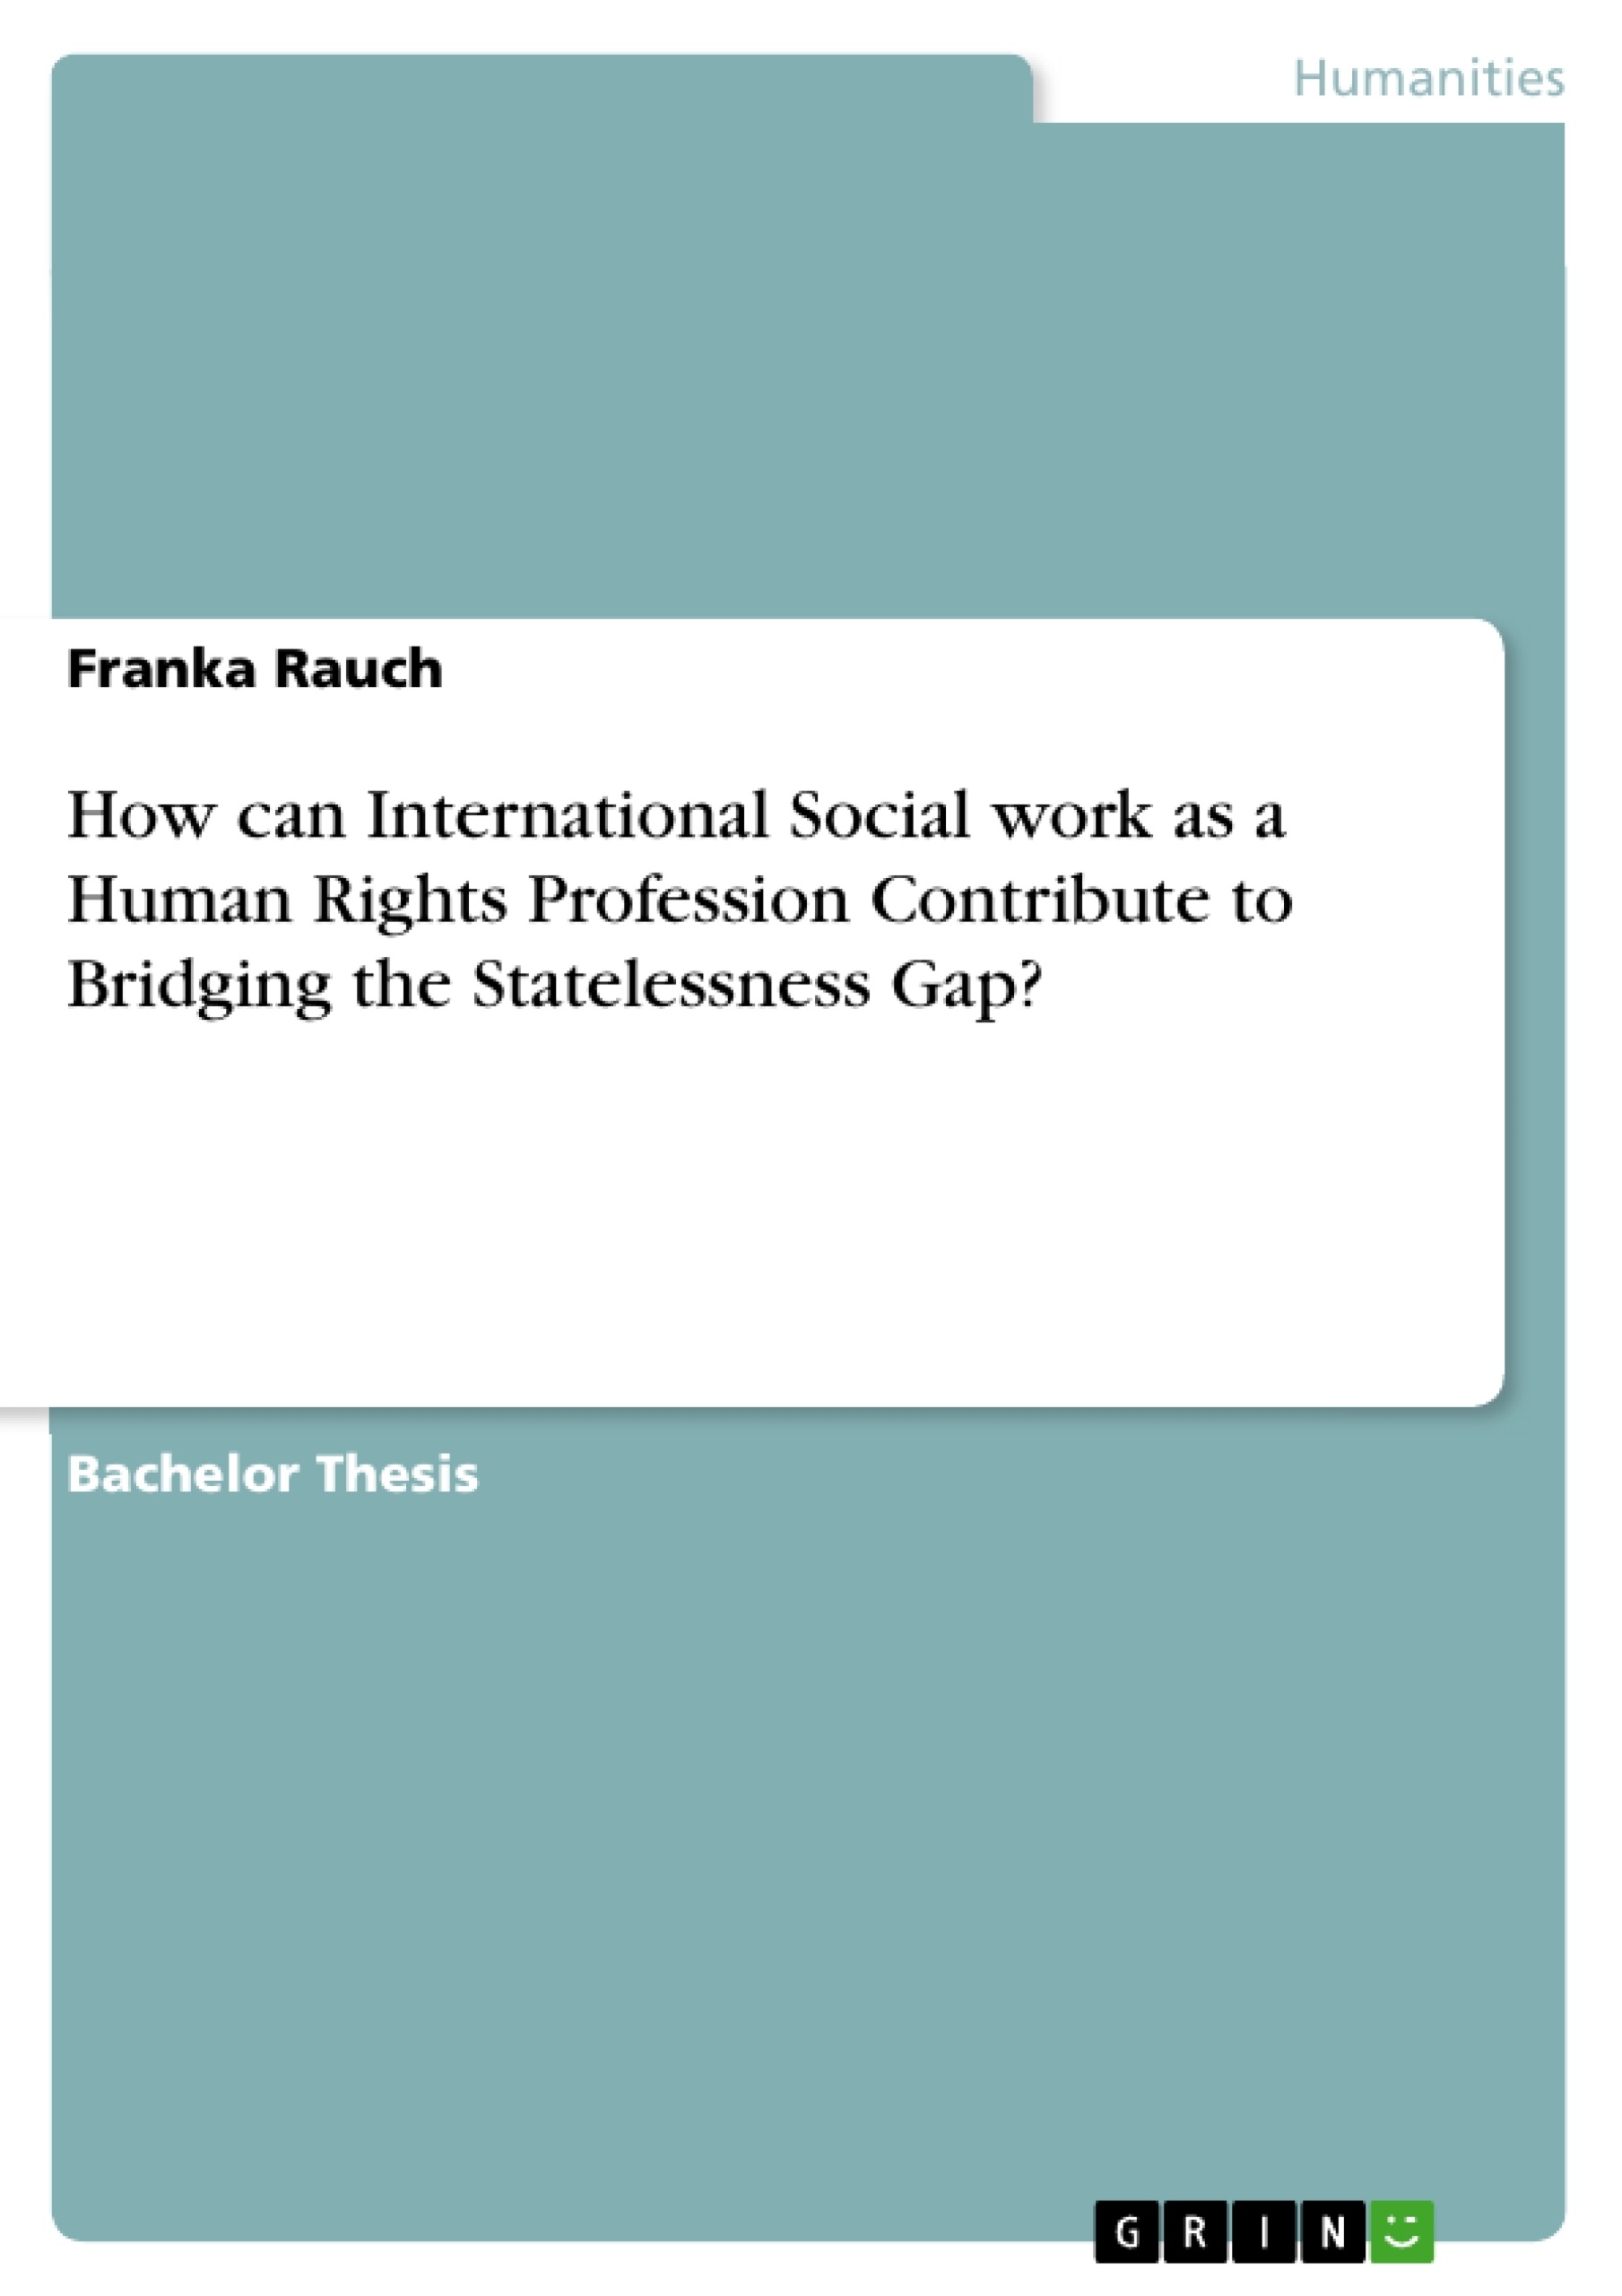 Título: How can International Social work as a Human Rights Profession Contribute to Bridging the Statelessness Gap?